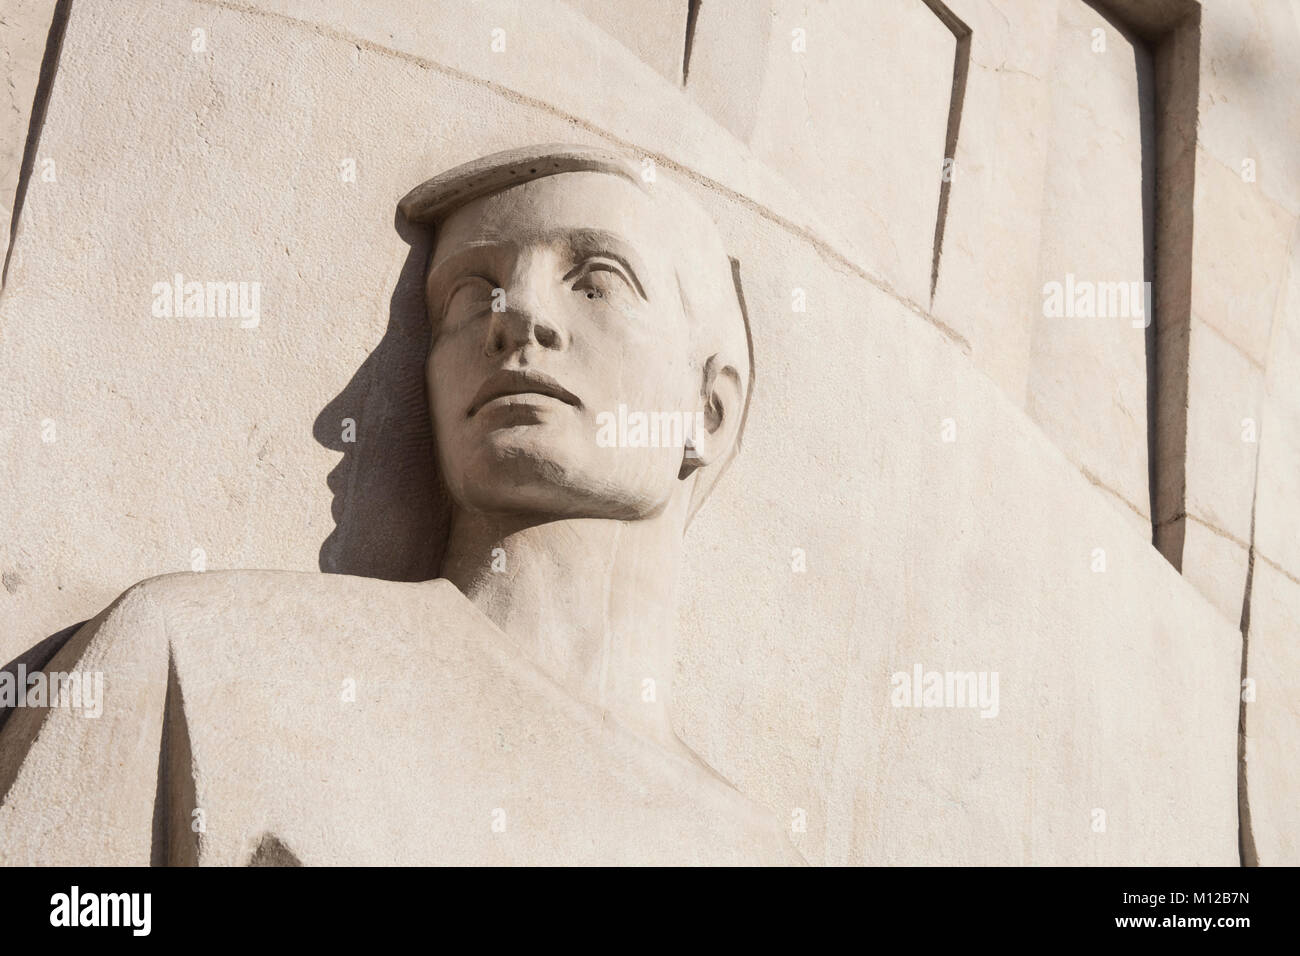 Detail of statue in Barcelona, Spain. Stock Photo